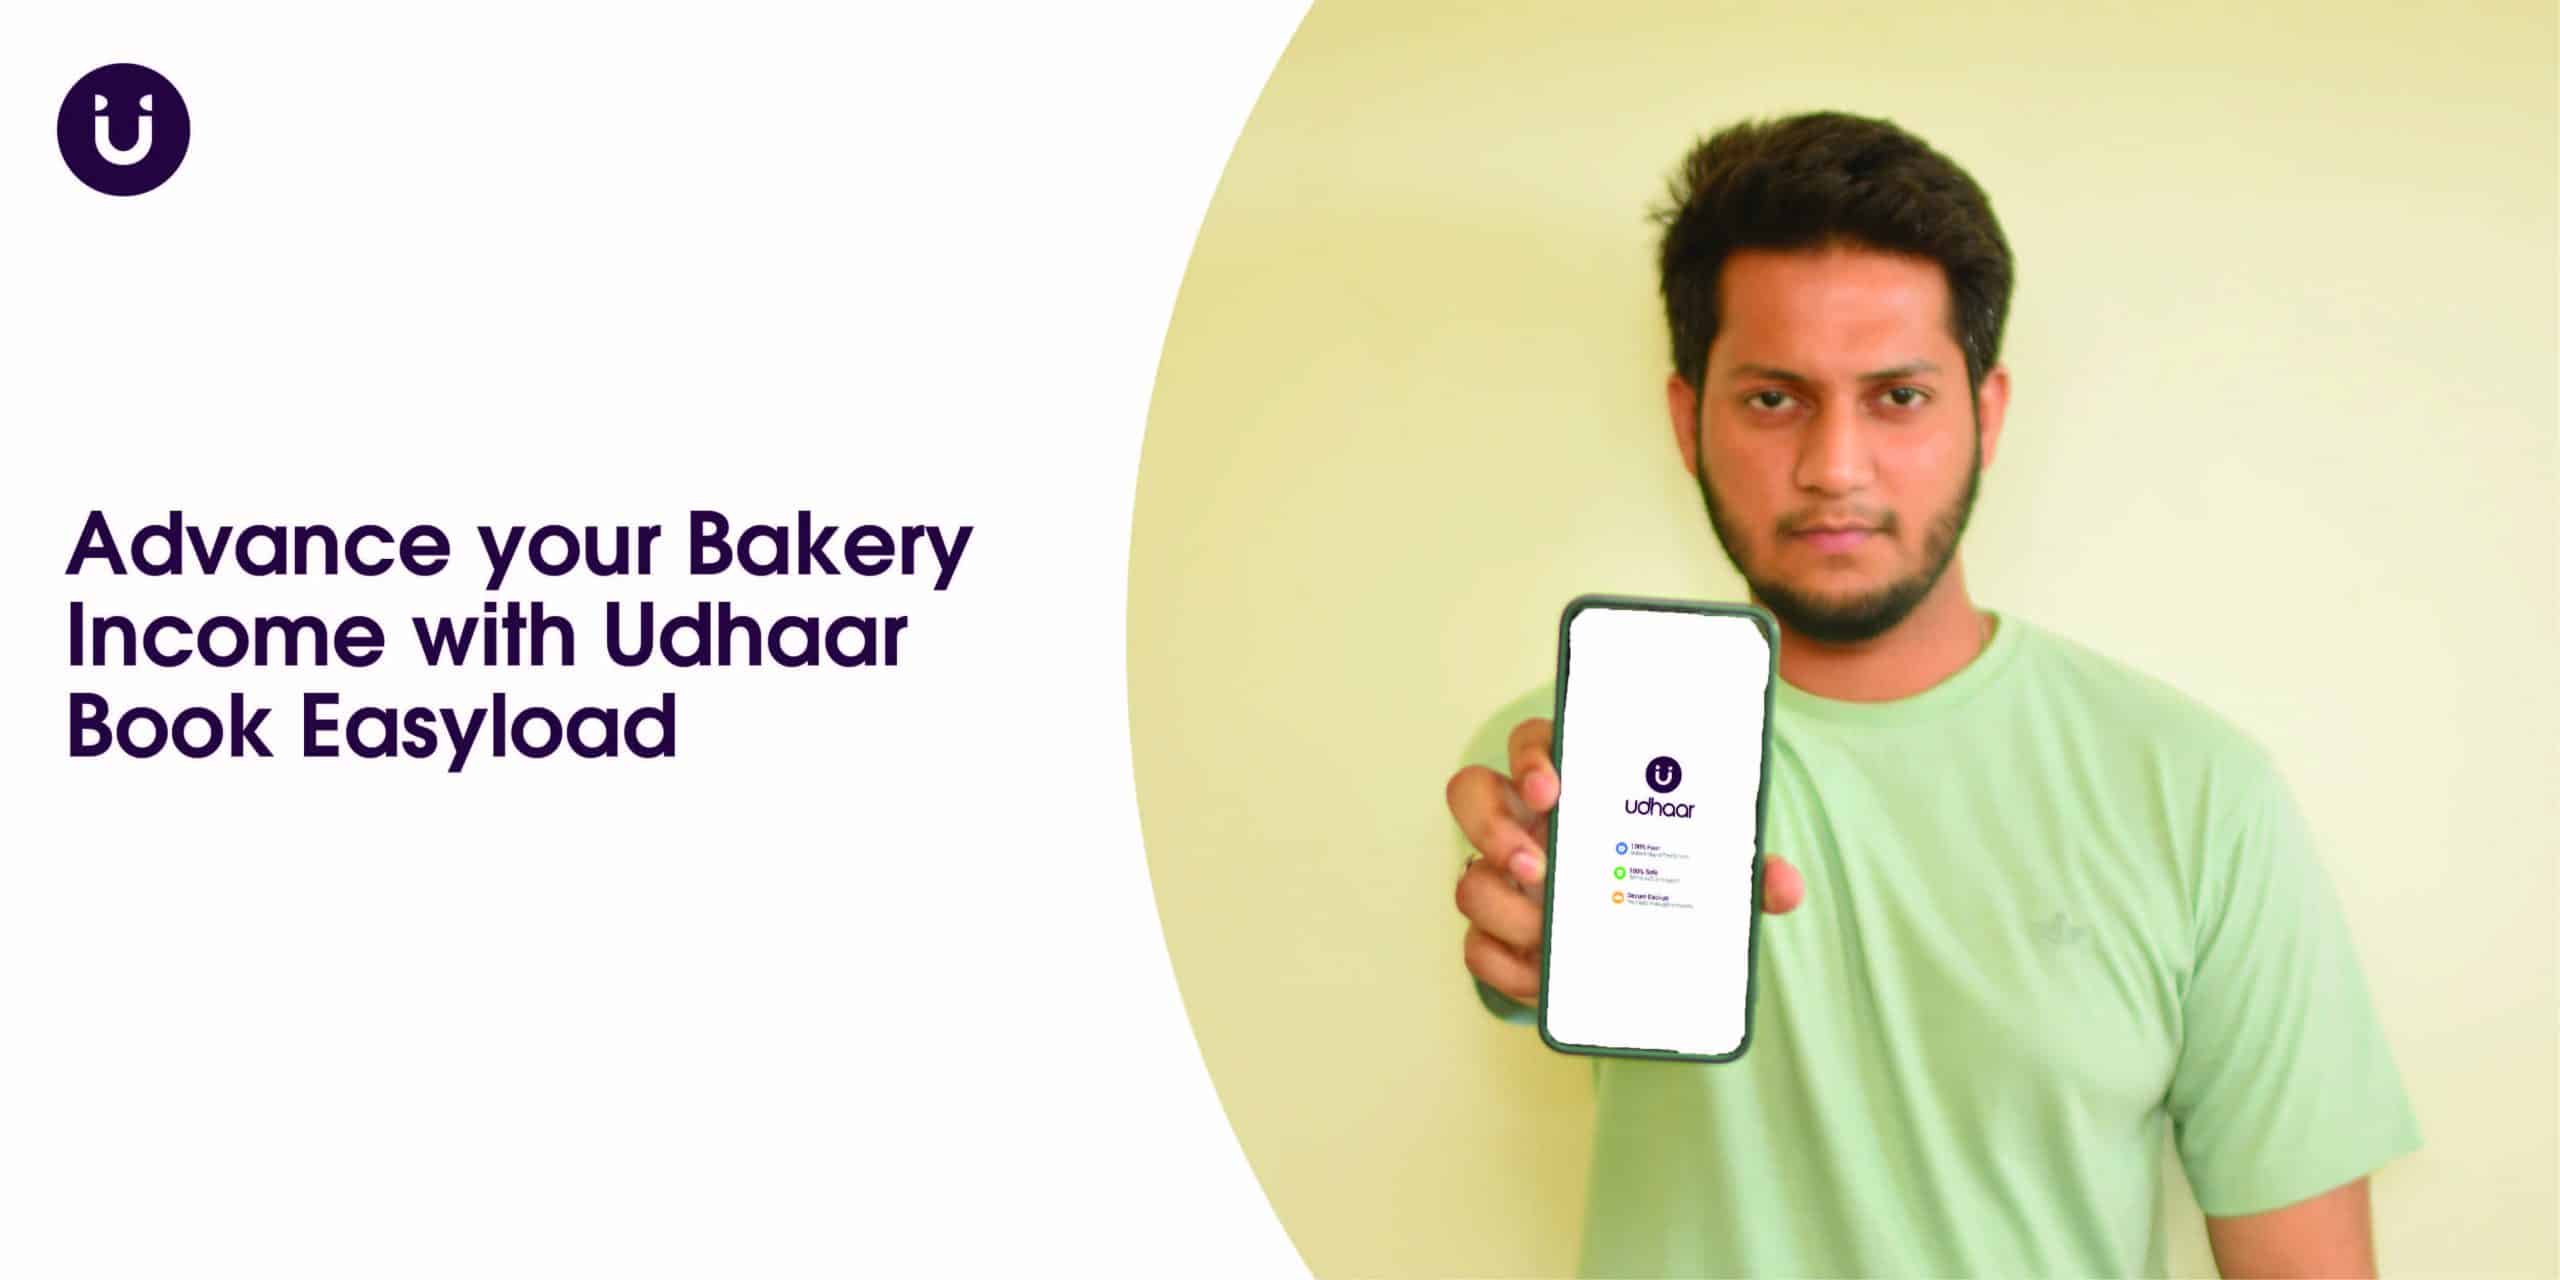 Advance your Bakery Income with Udhaar Book Easyload